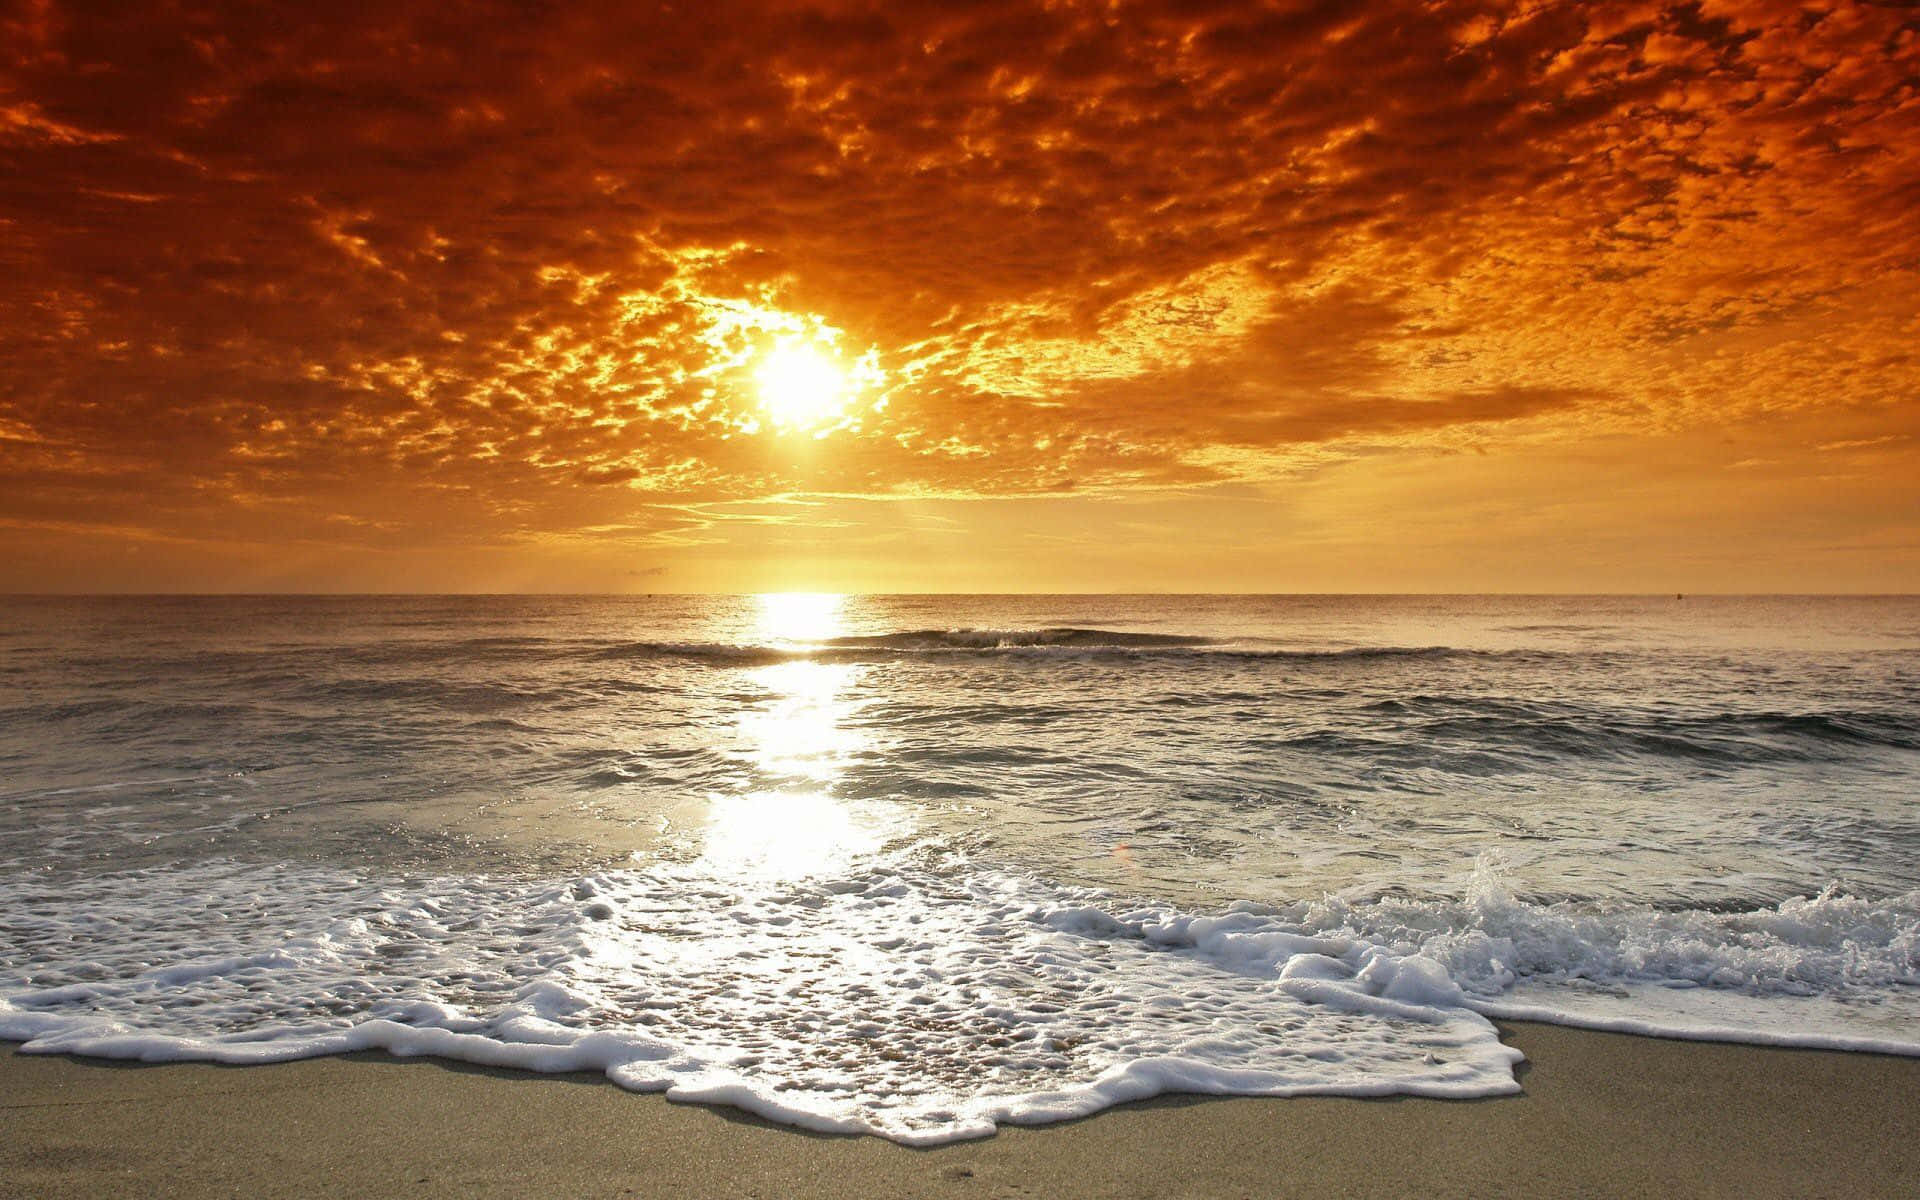 Unwind and Enjoy the Tranquil Beach Sunset